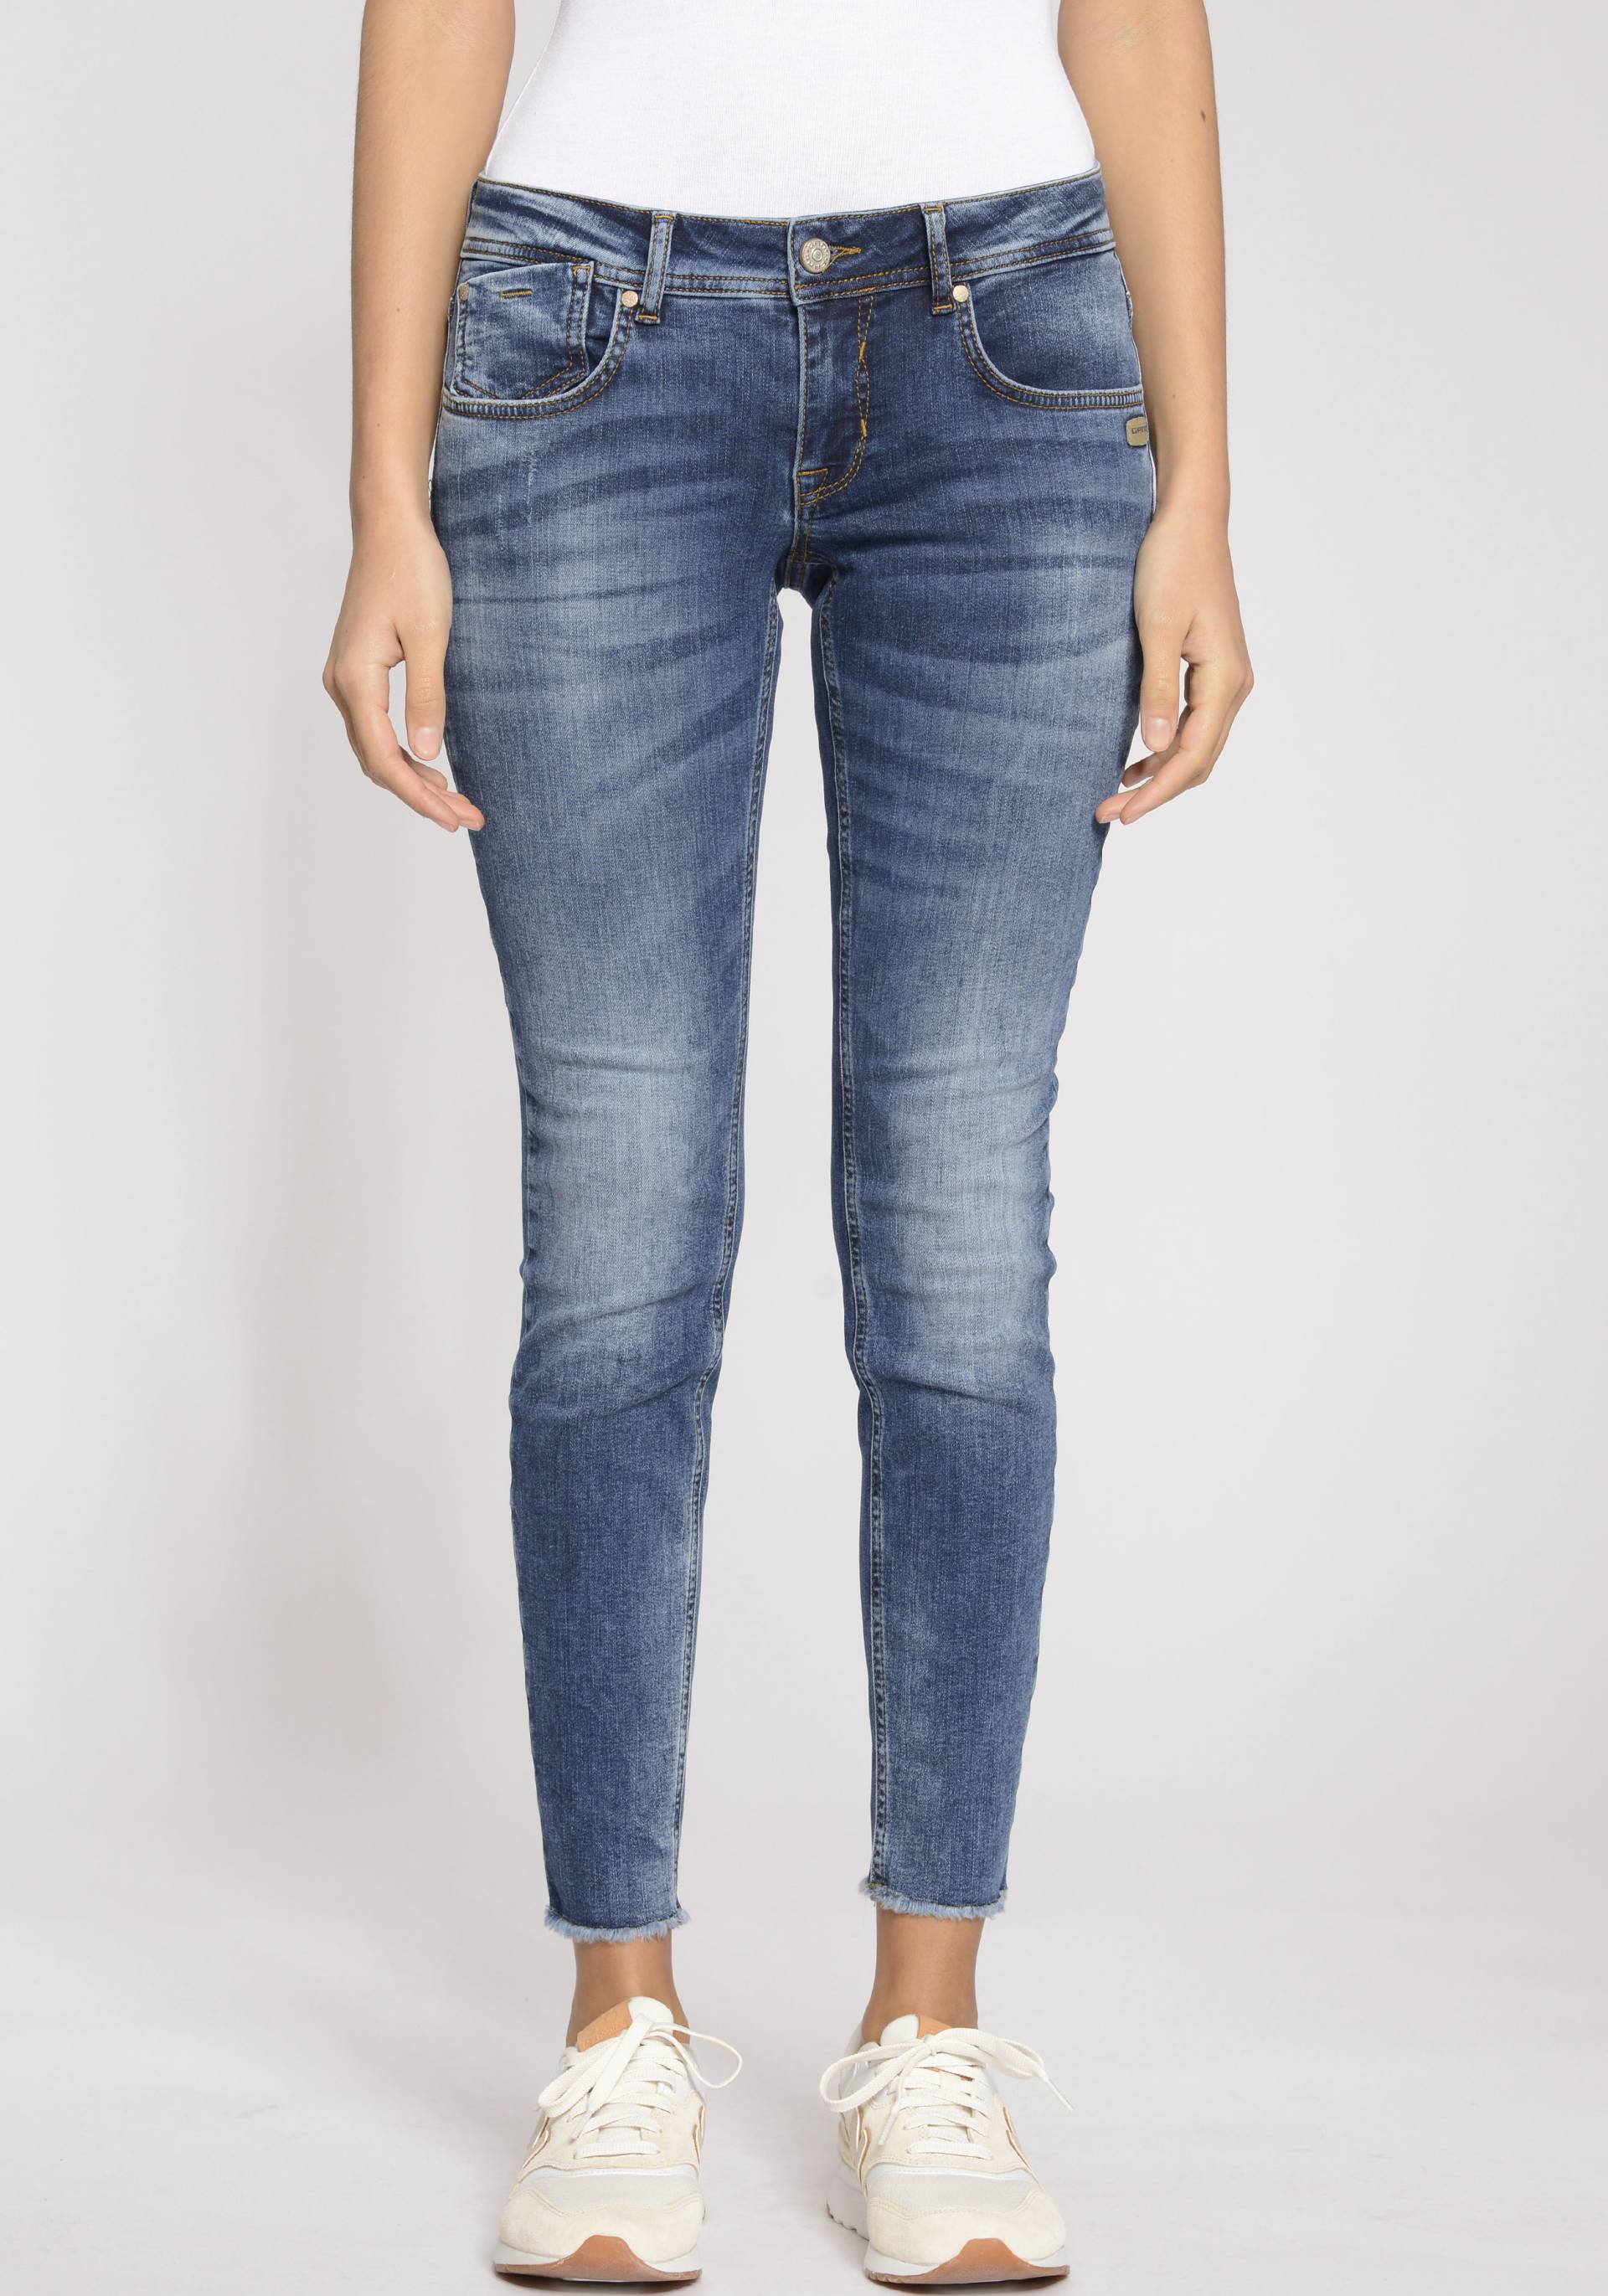 GANG Skinny-fit-Jeans »94 Faye Cropped« von GANG